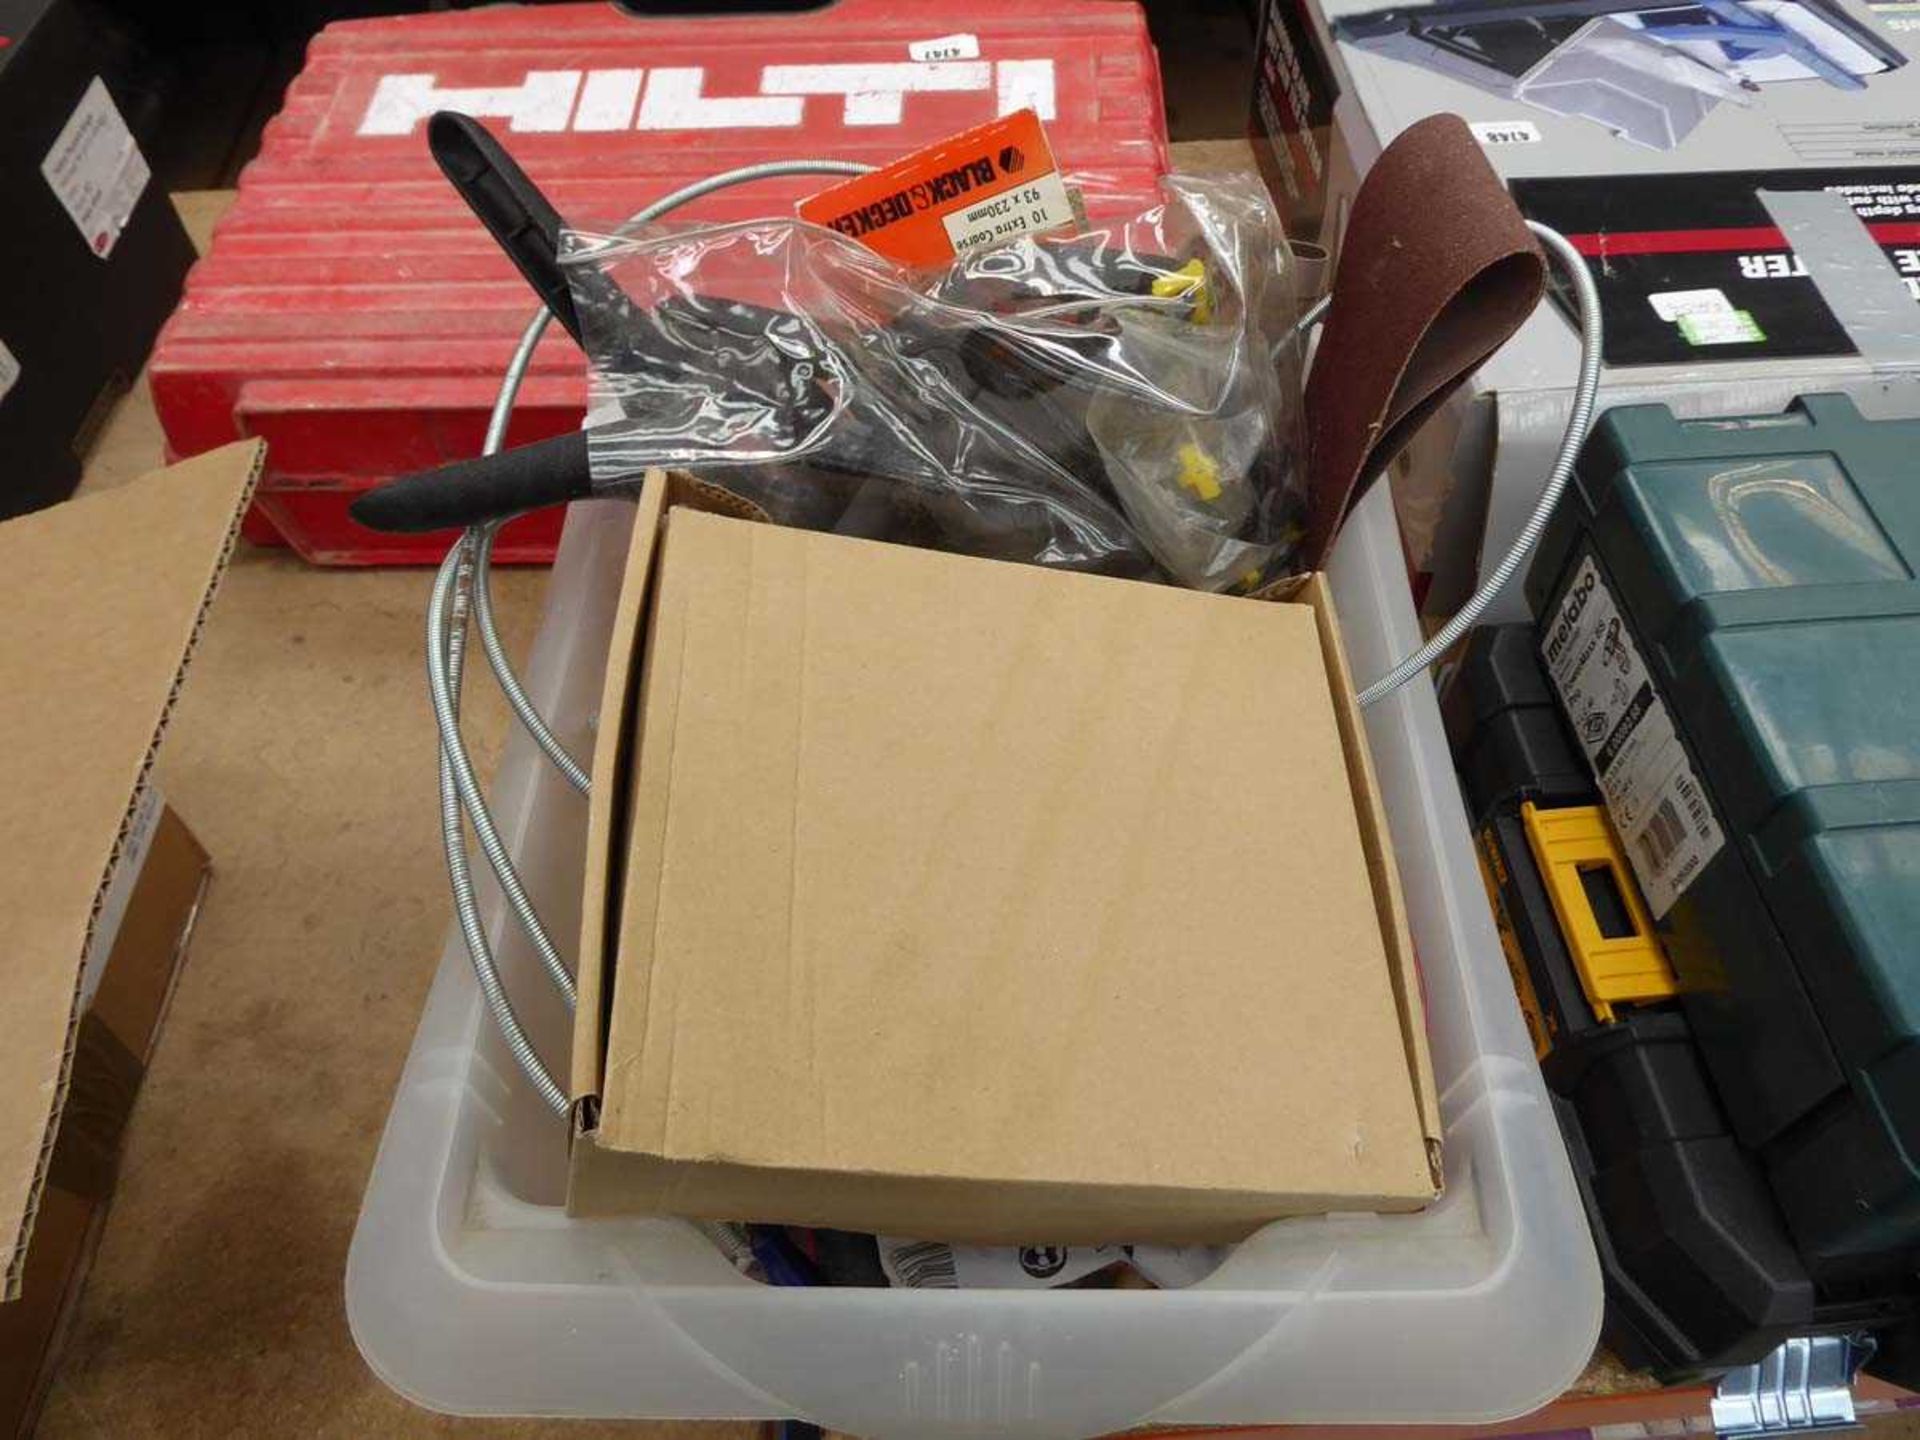 Plastic box of drain snake, sanding belts and various other tools